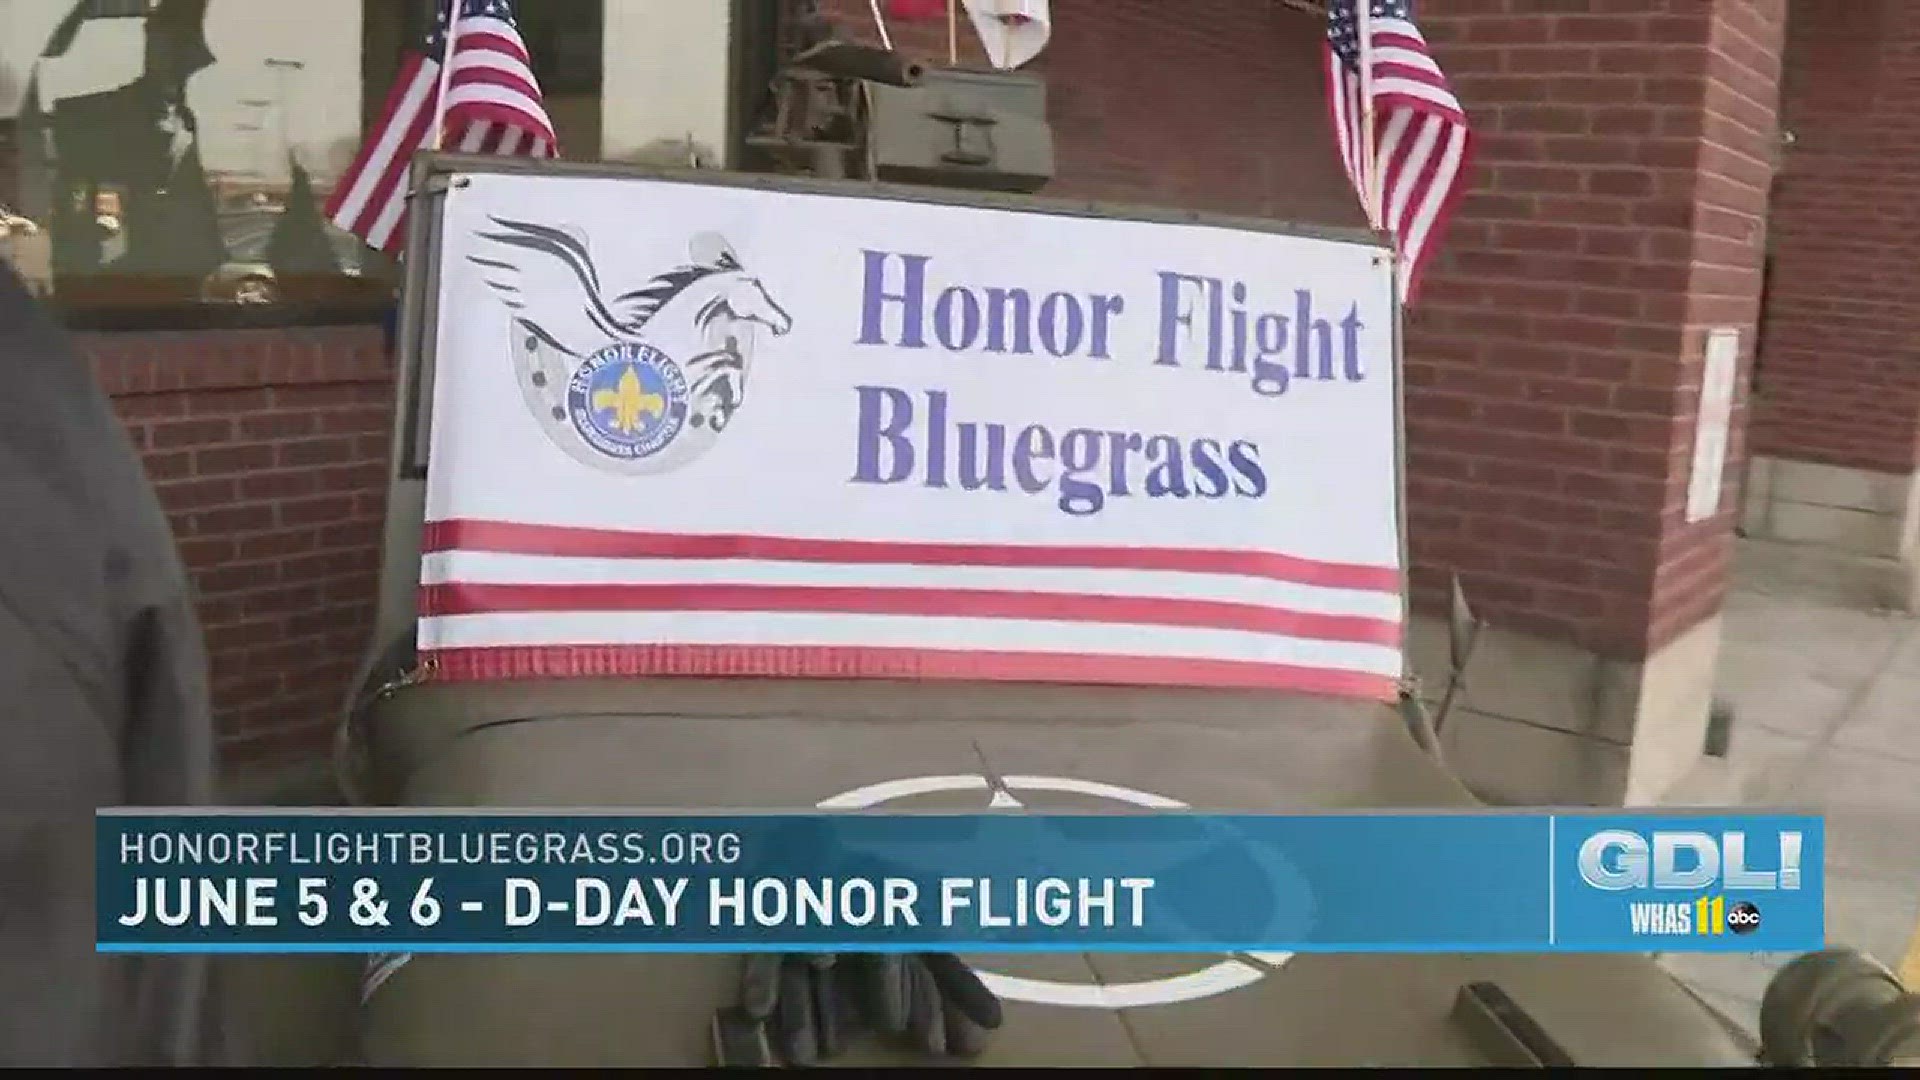 D-Day flights to D.C. to honor local veterans